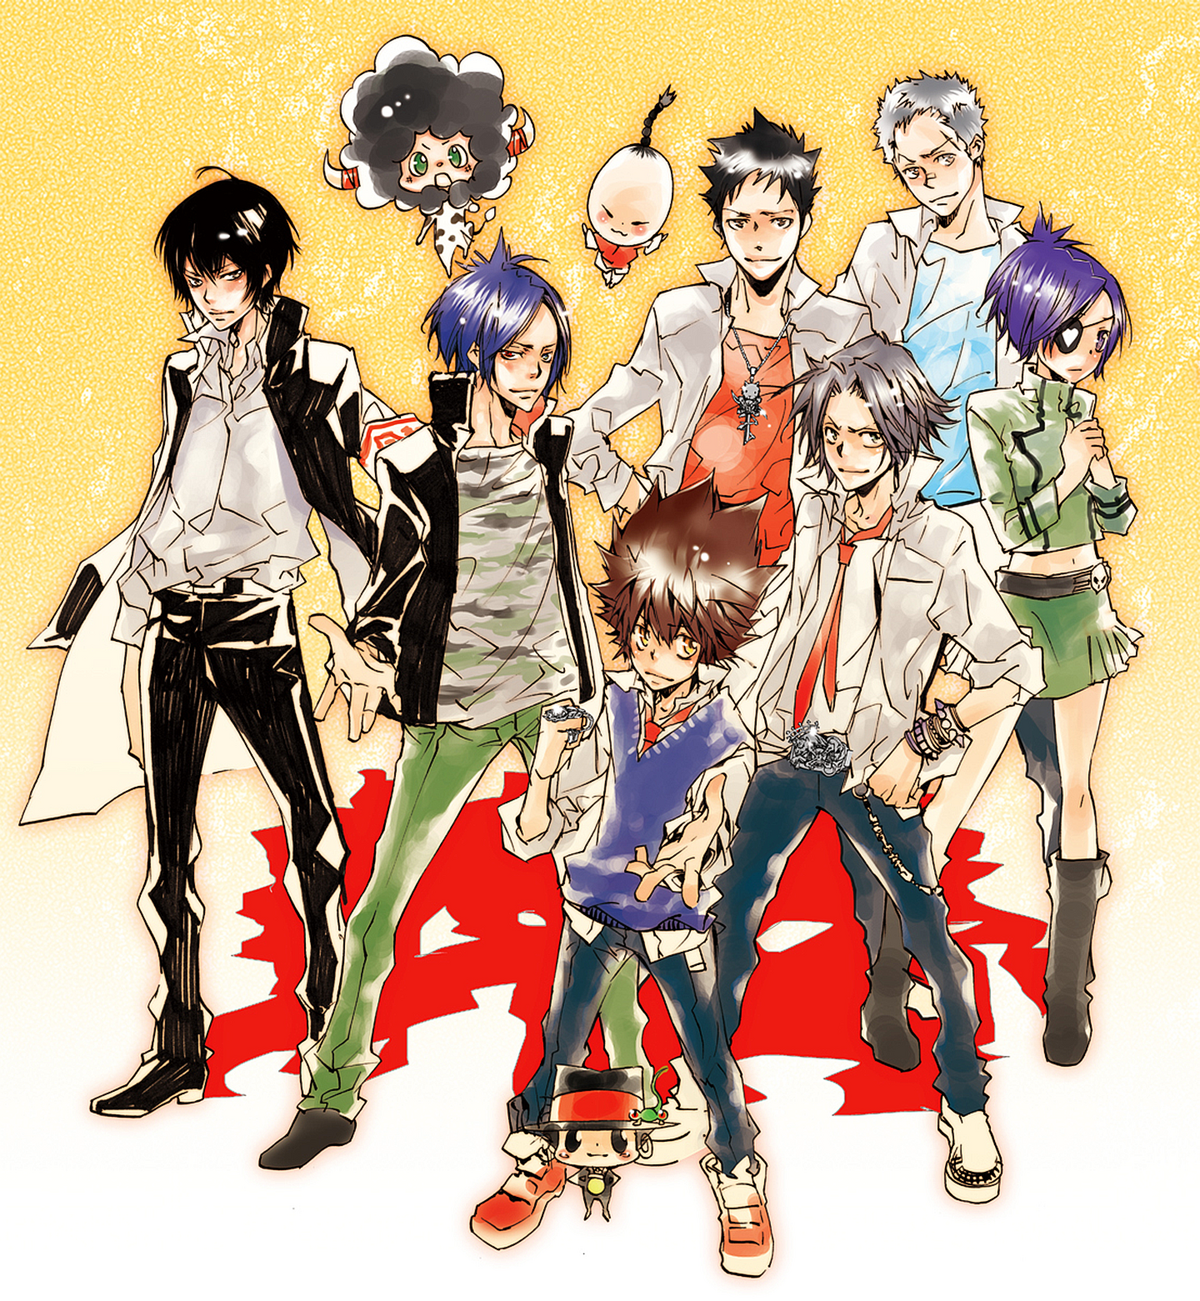 39 Awesome hitman reborn cast images